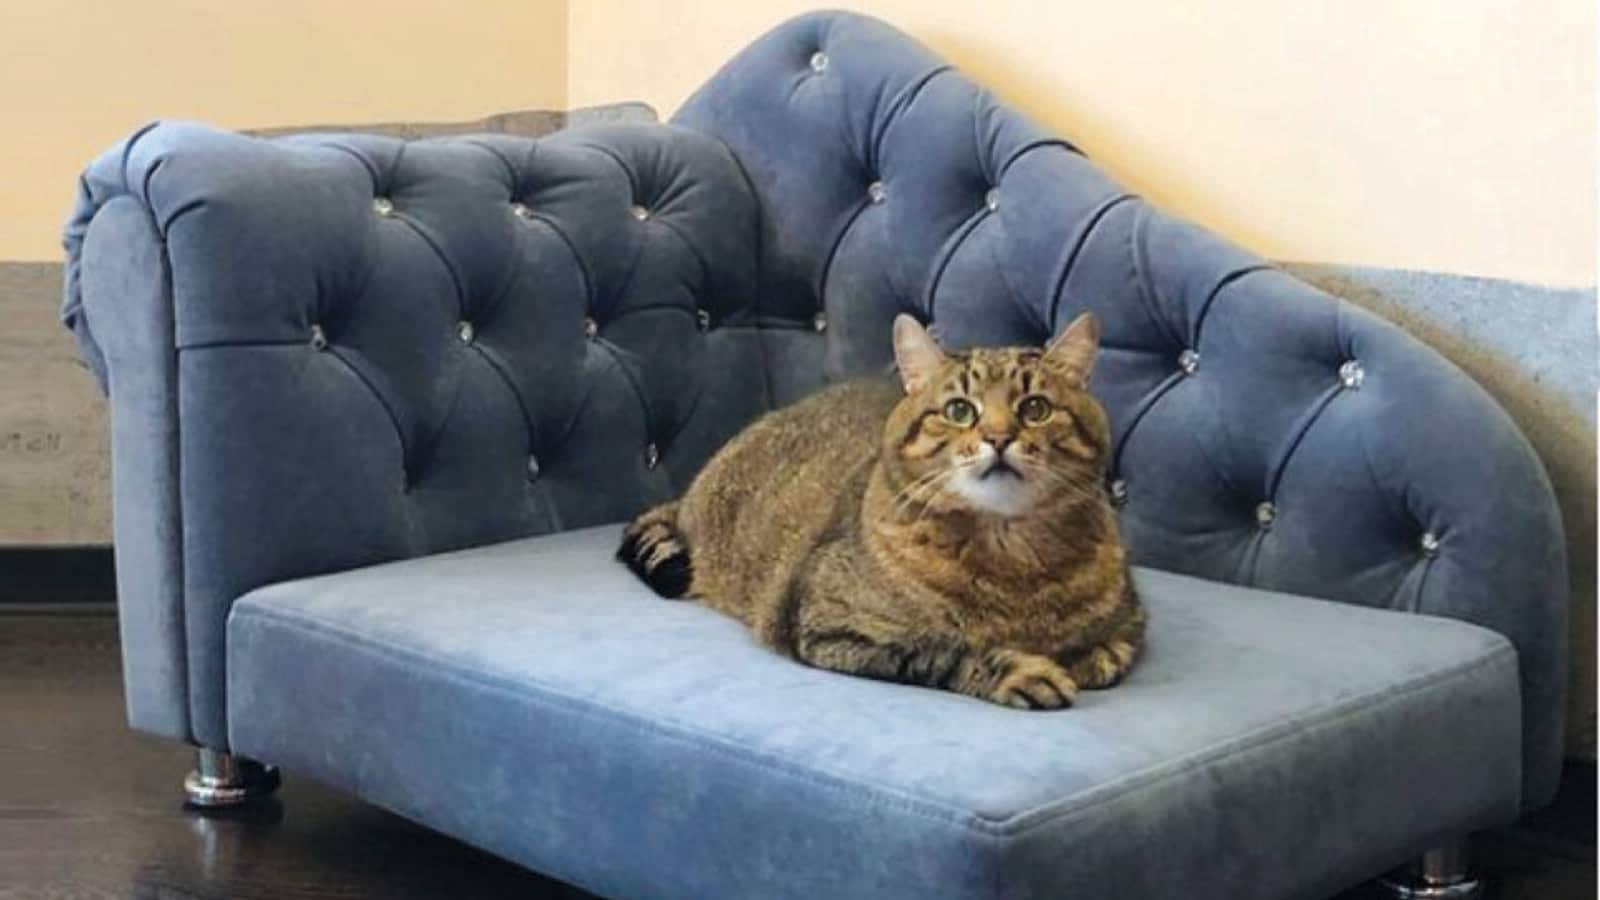 Social Media Star of The Week: Stepan the ‘chill’ cat